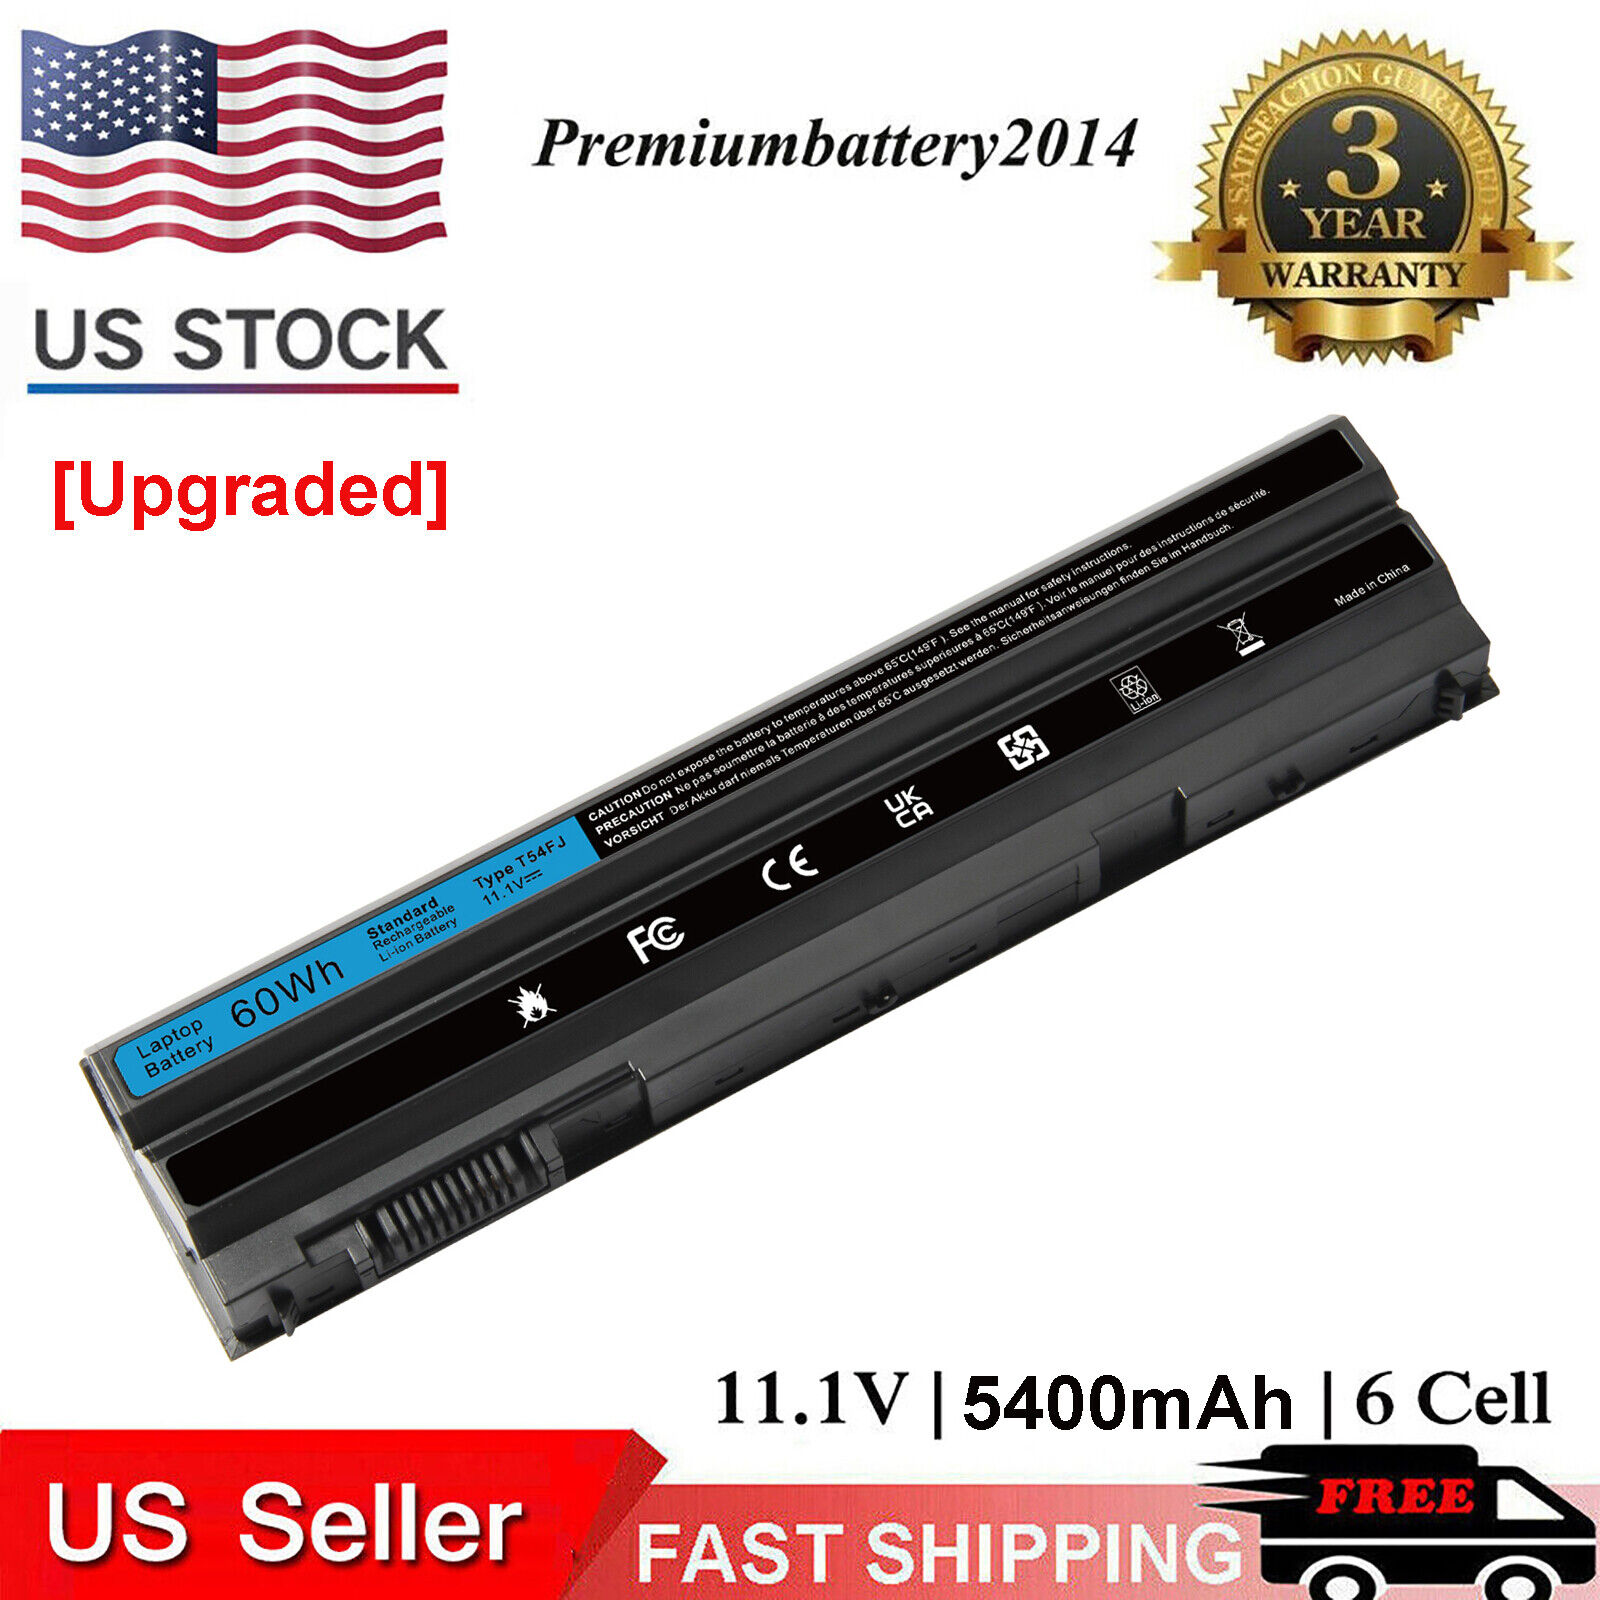 New 60Wh 11.1V Battery For Dell Inspiron 4420 5420 5425 7420 7520 4720 5720 7720